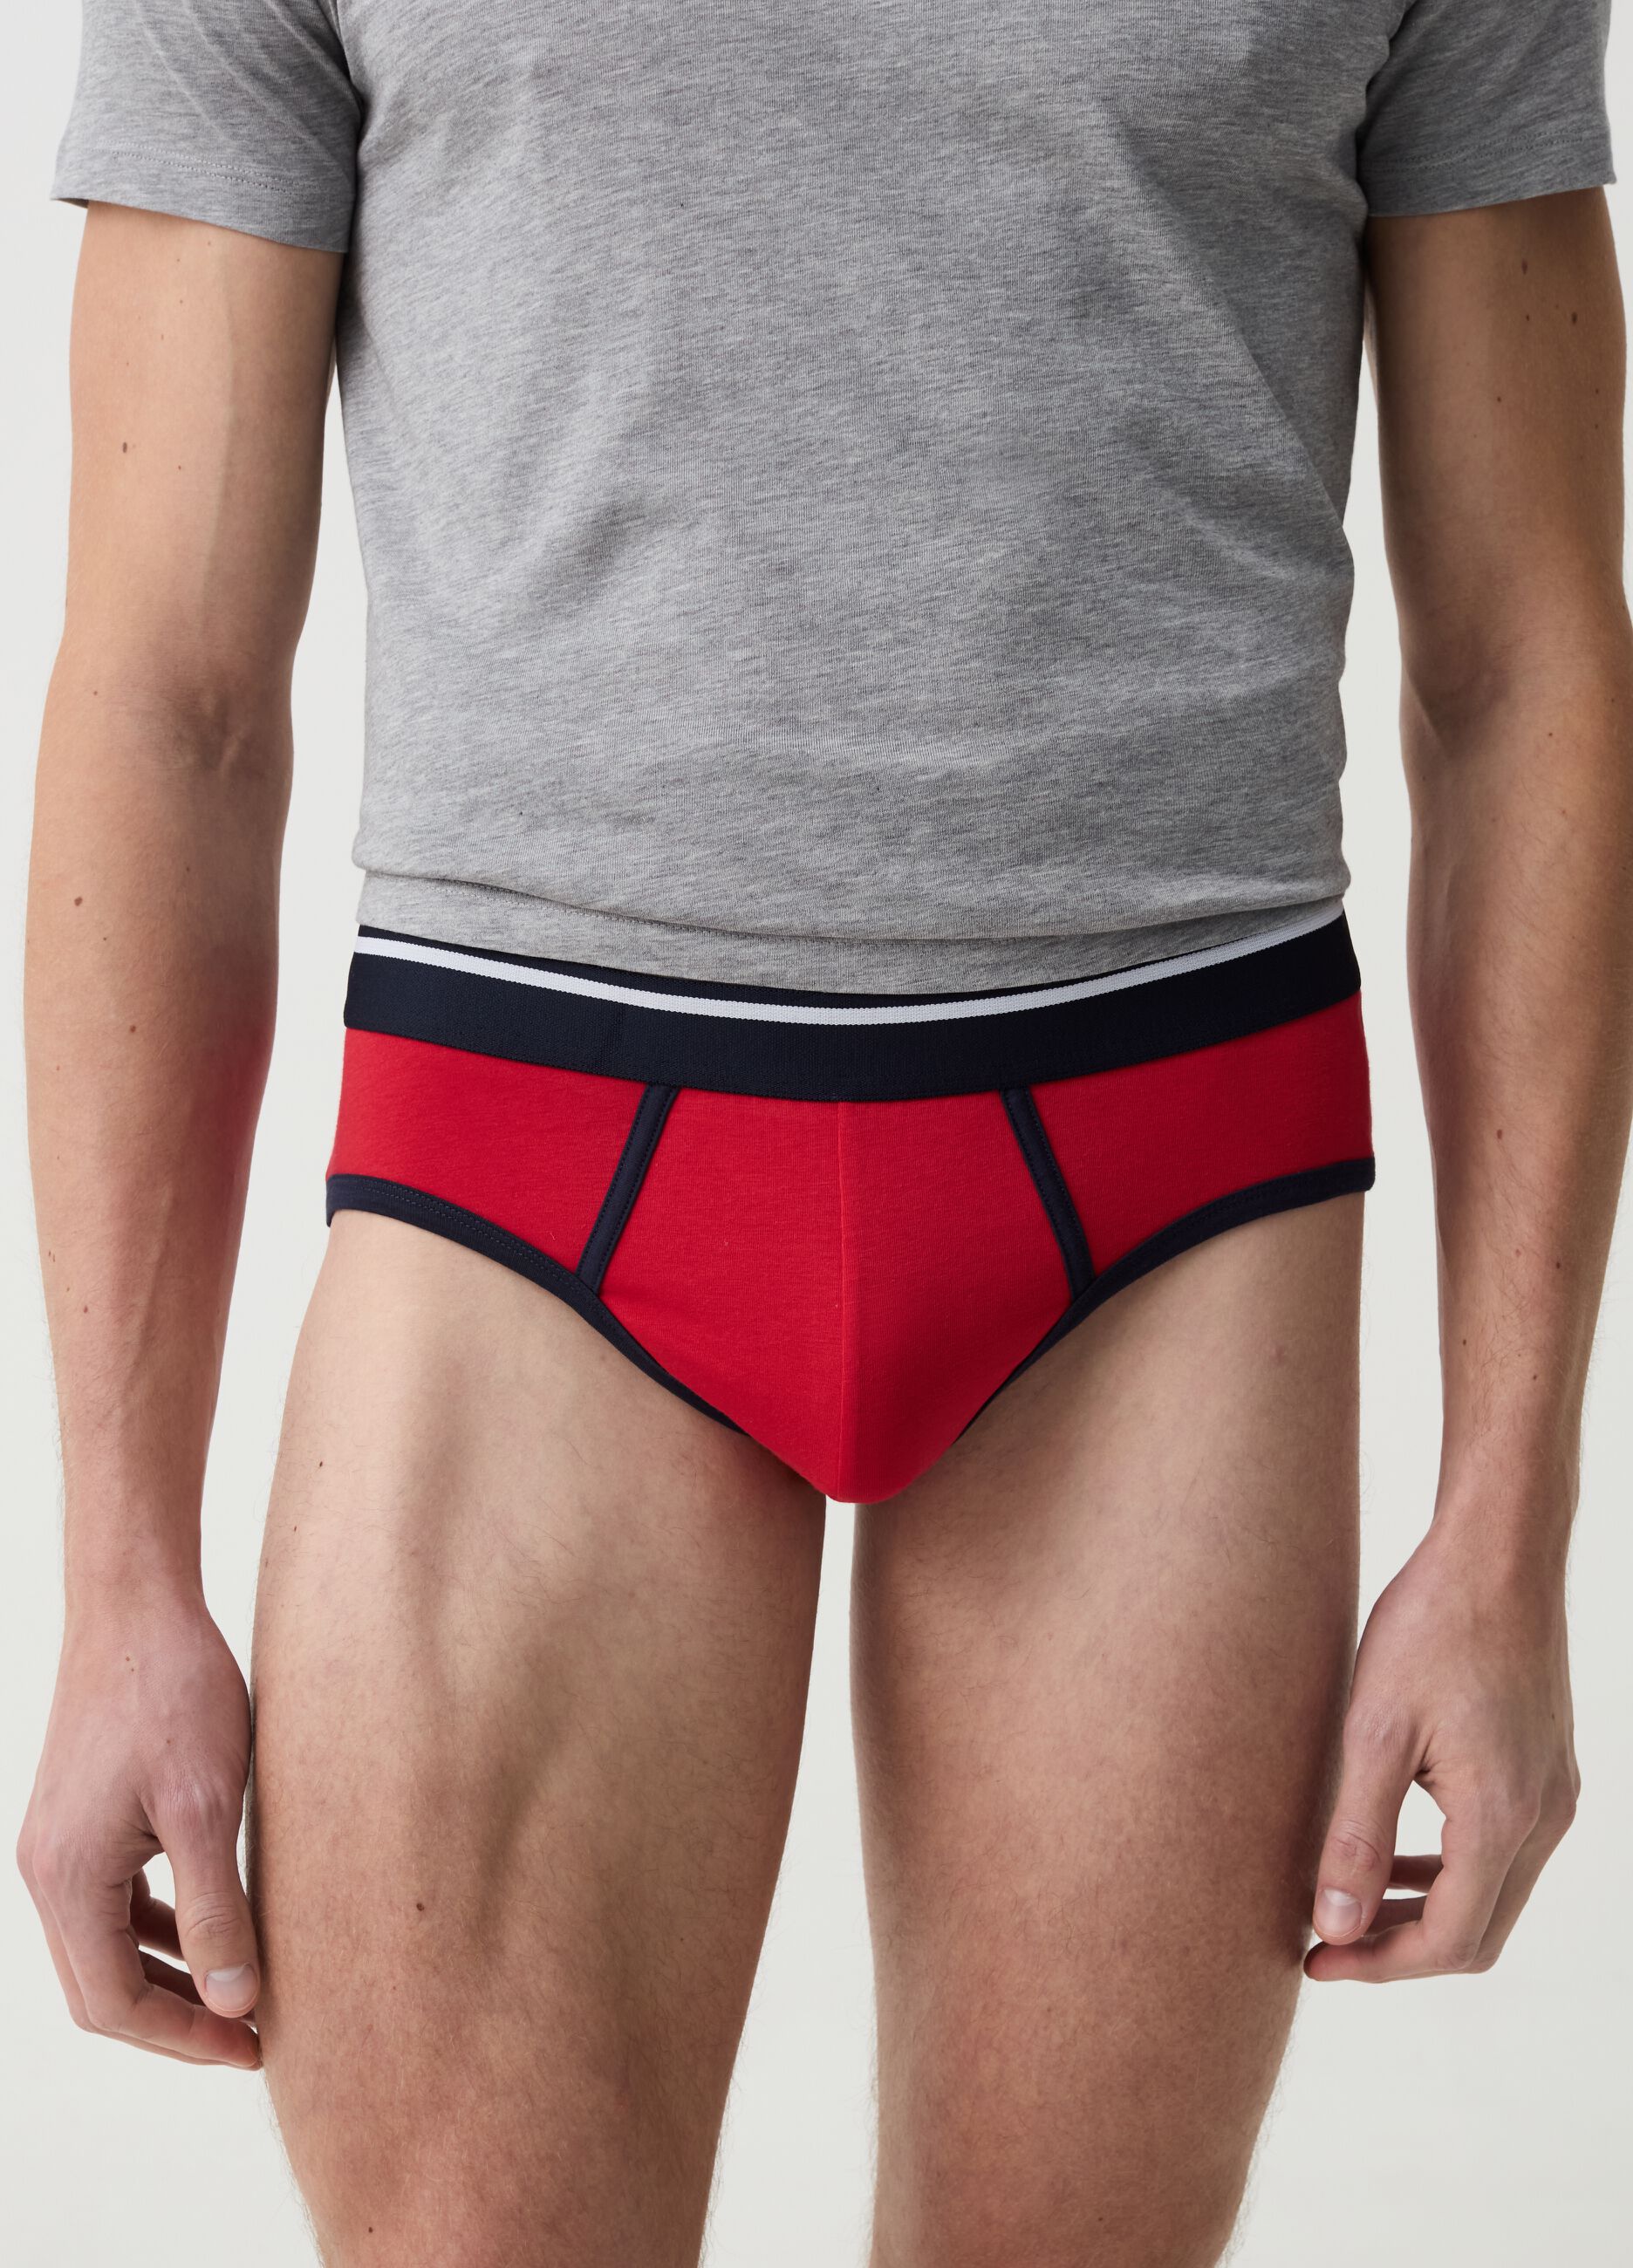 Three-pair pack briefs with contrasting piping